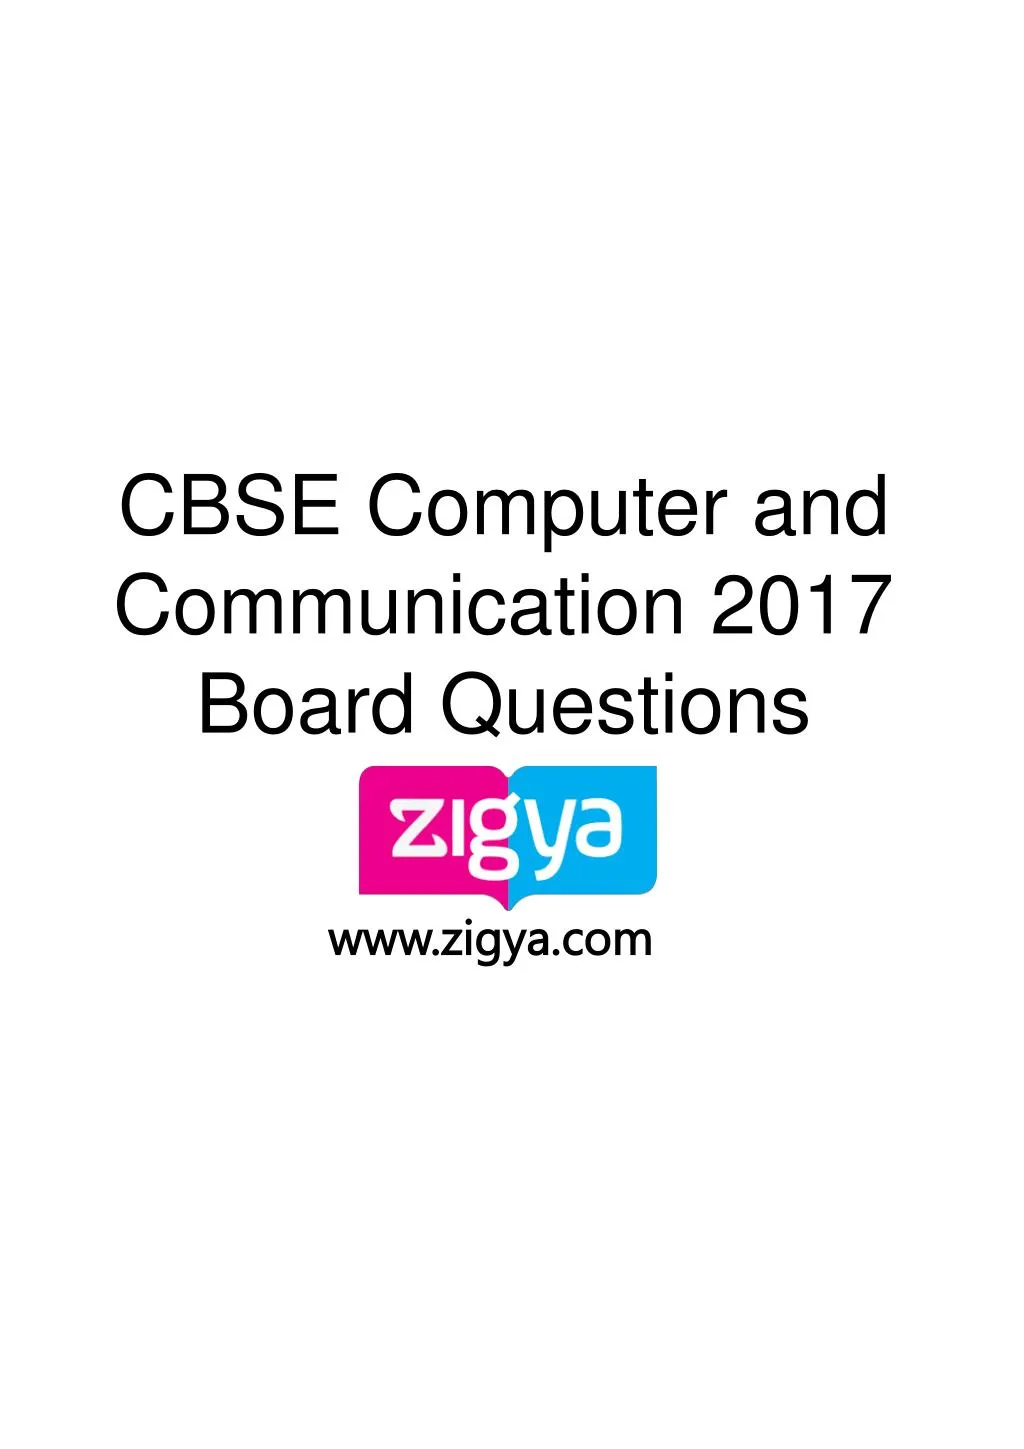 cbse computer and communication 2017 board